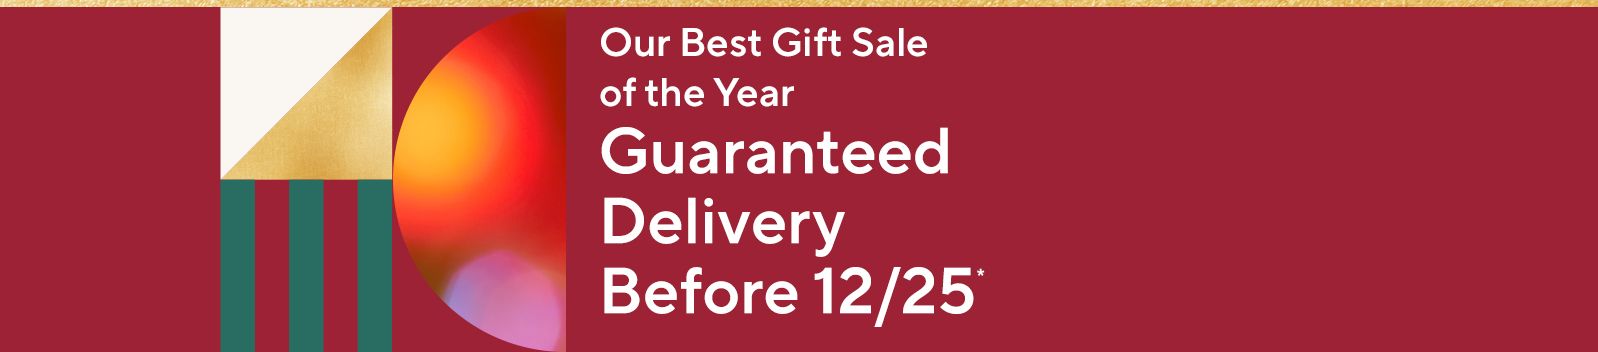 Our Best Gift Sale of the Year - Guaranteed Delivery Before 12/25*